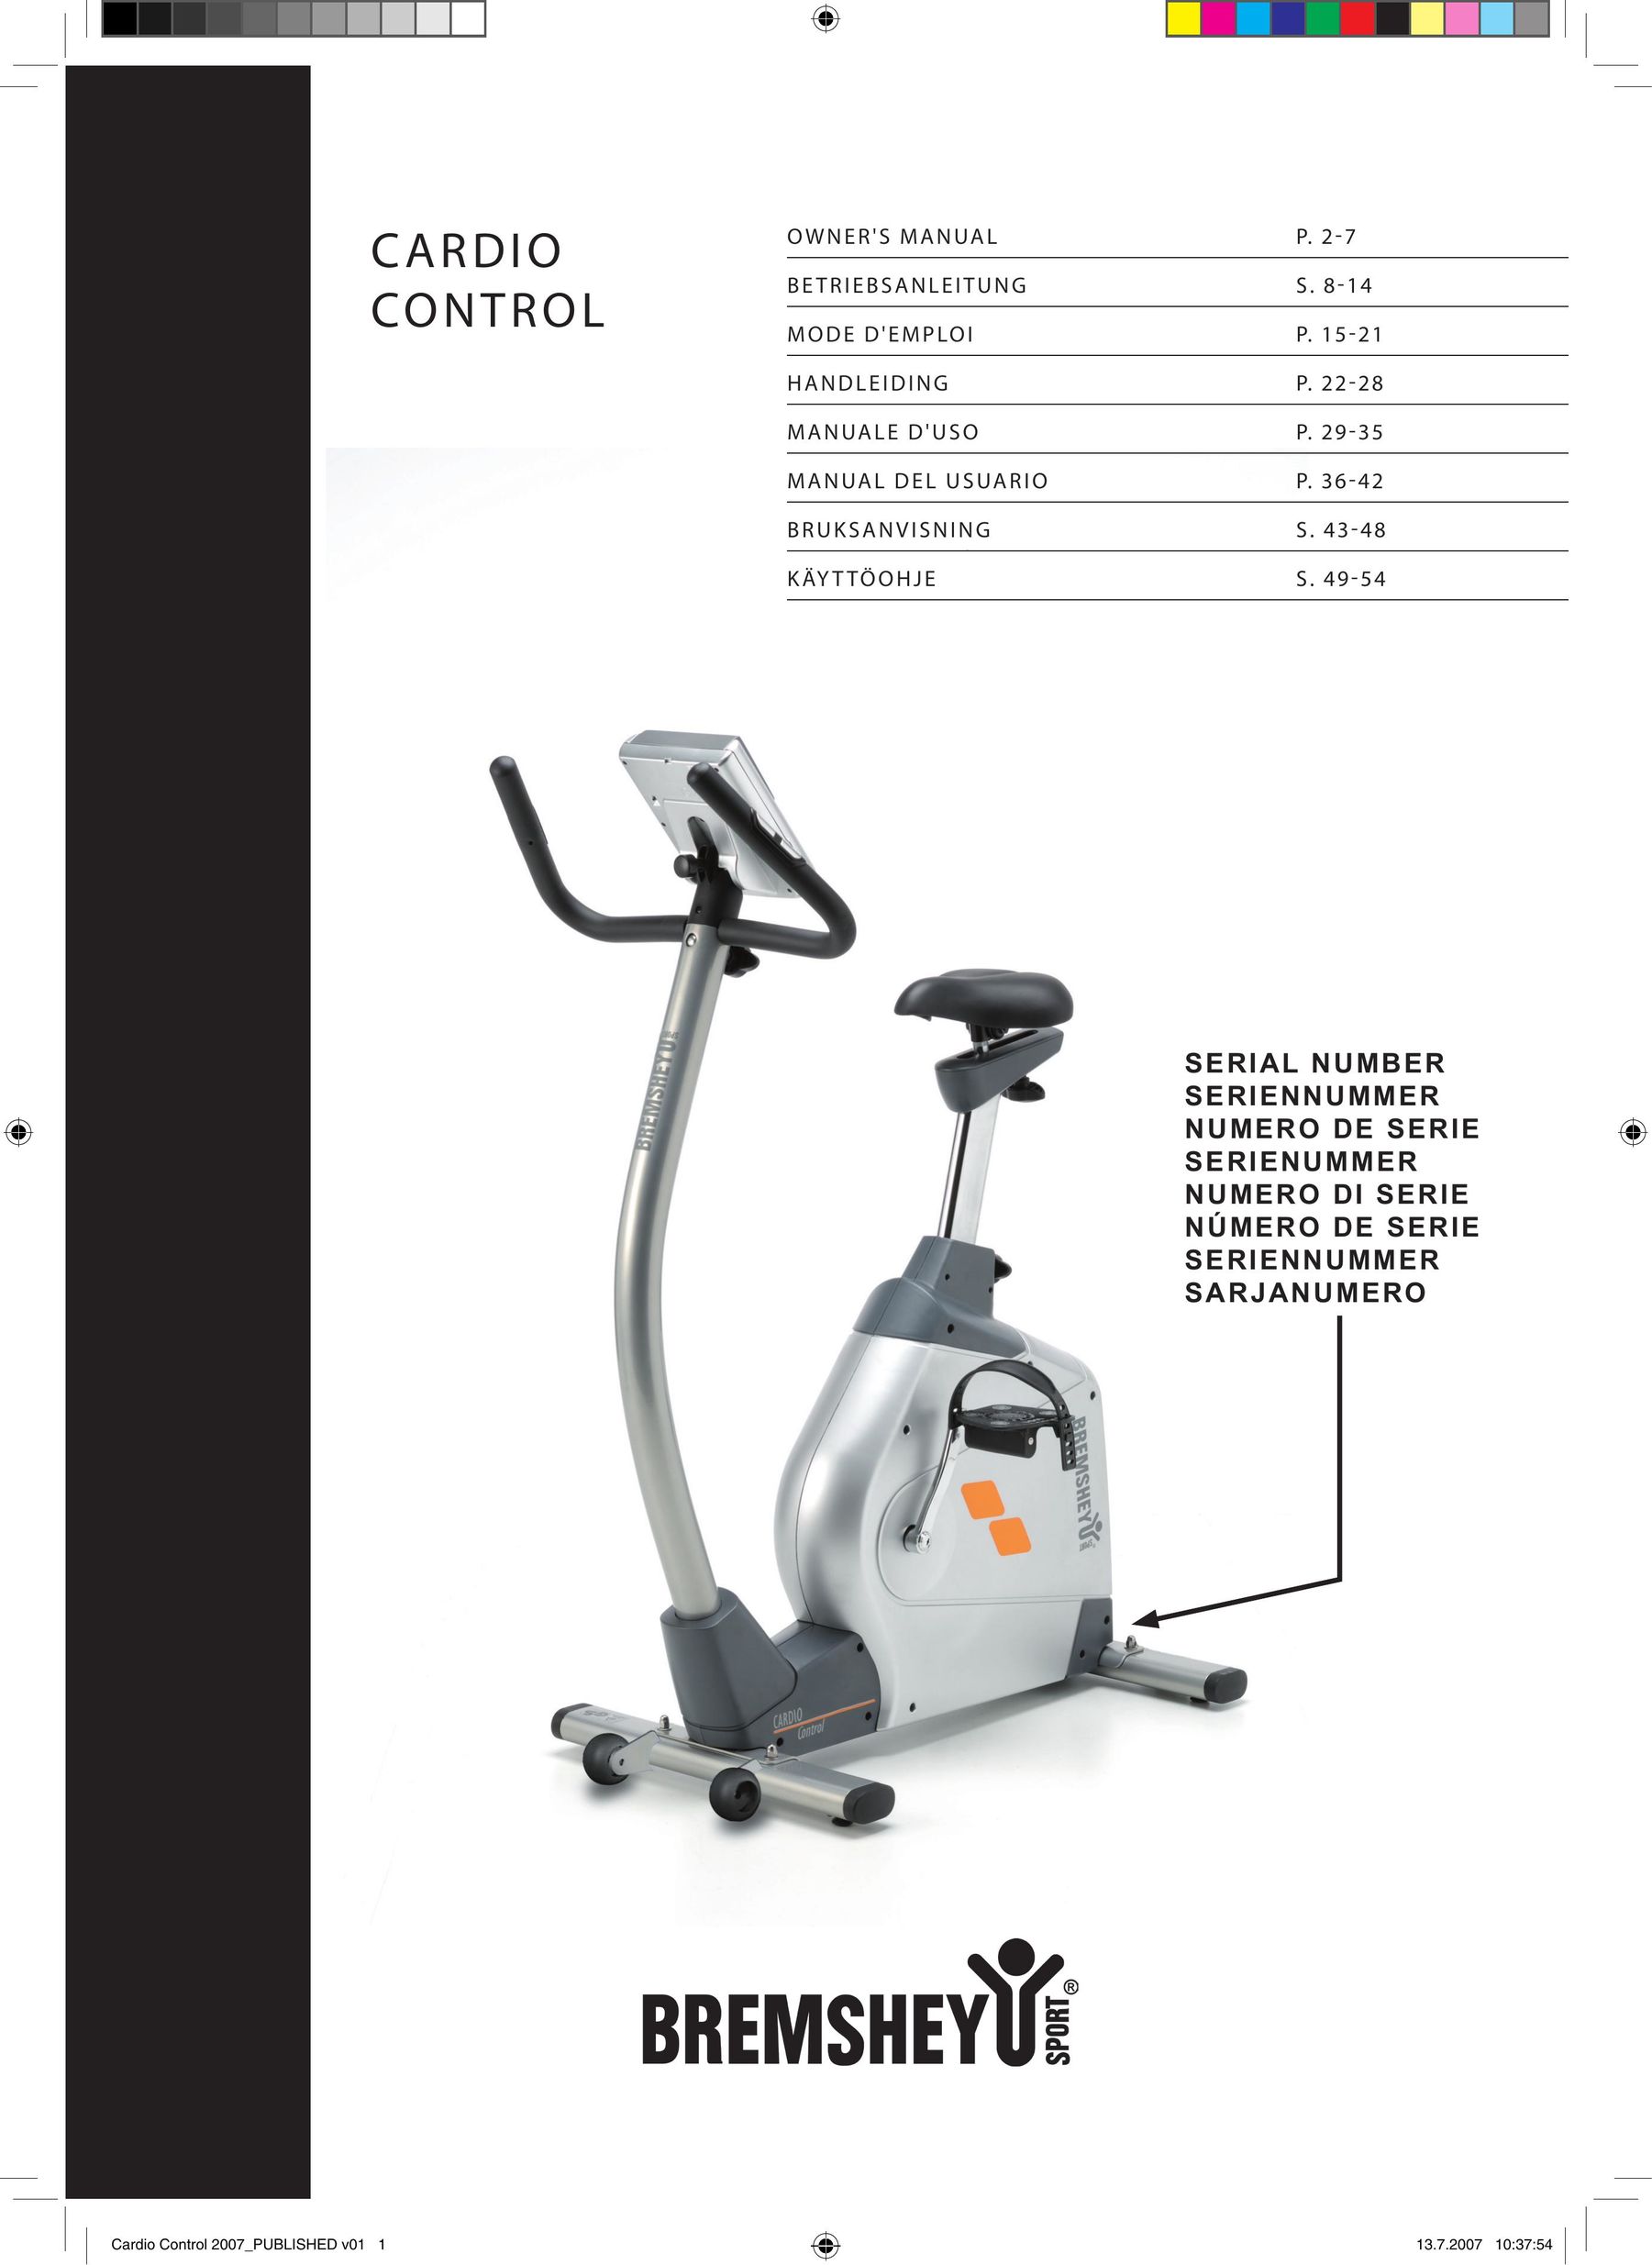 Accell Cardio Control Bicycle Accessories User Manual (Page 1)